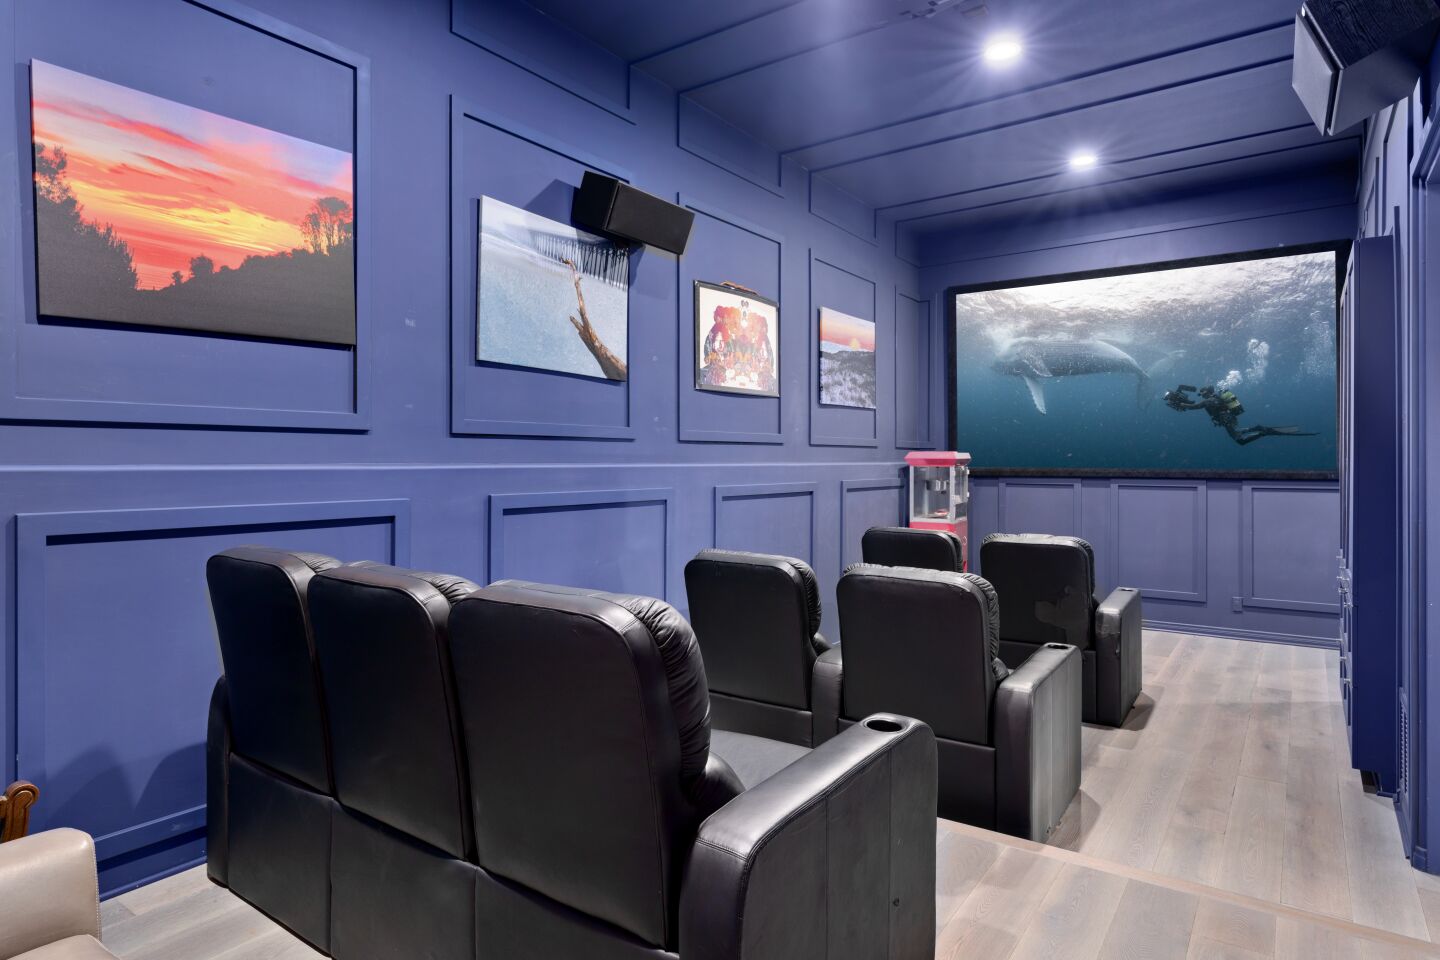 The home theater features tiered seating.